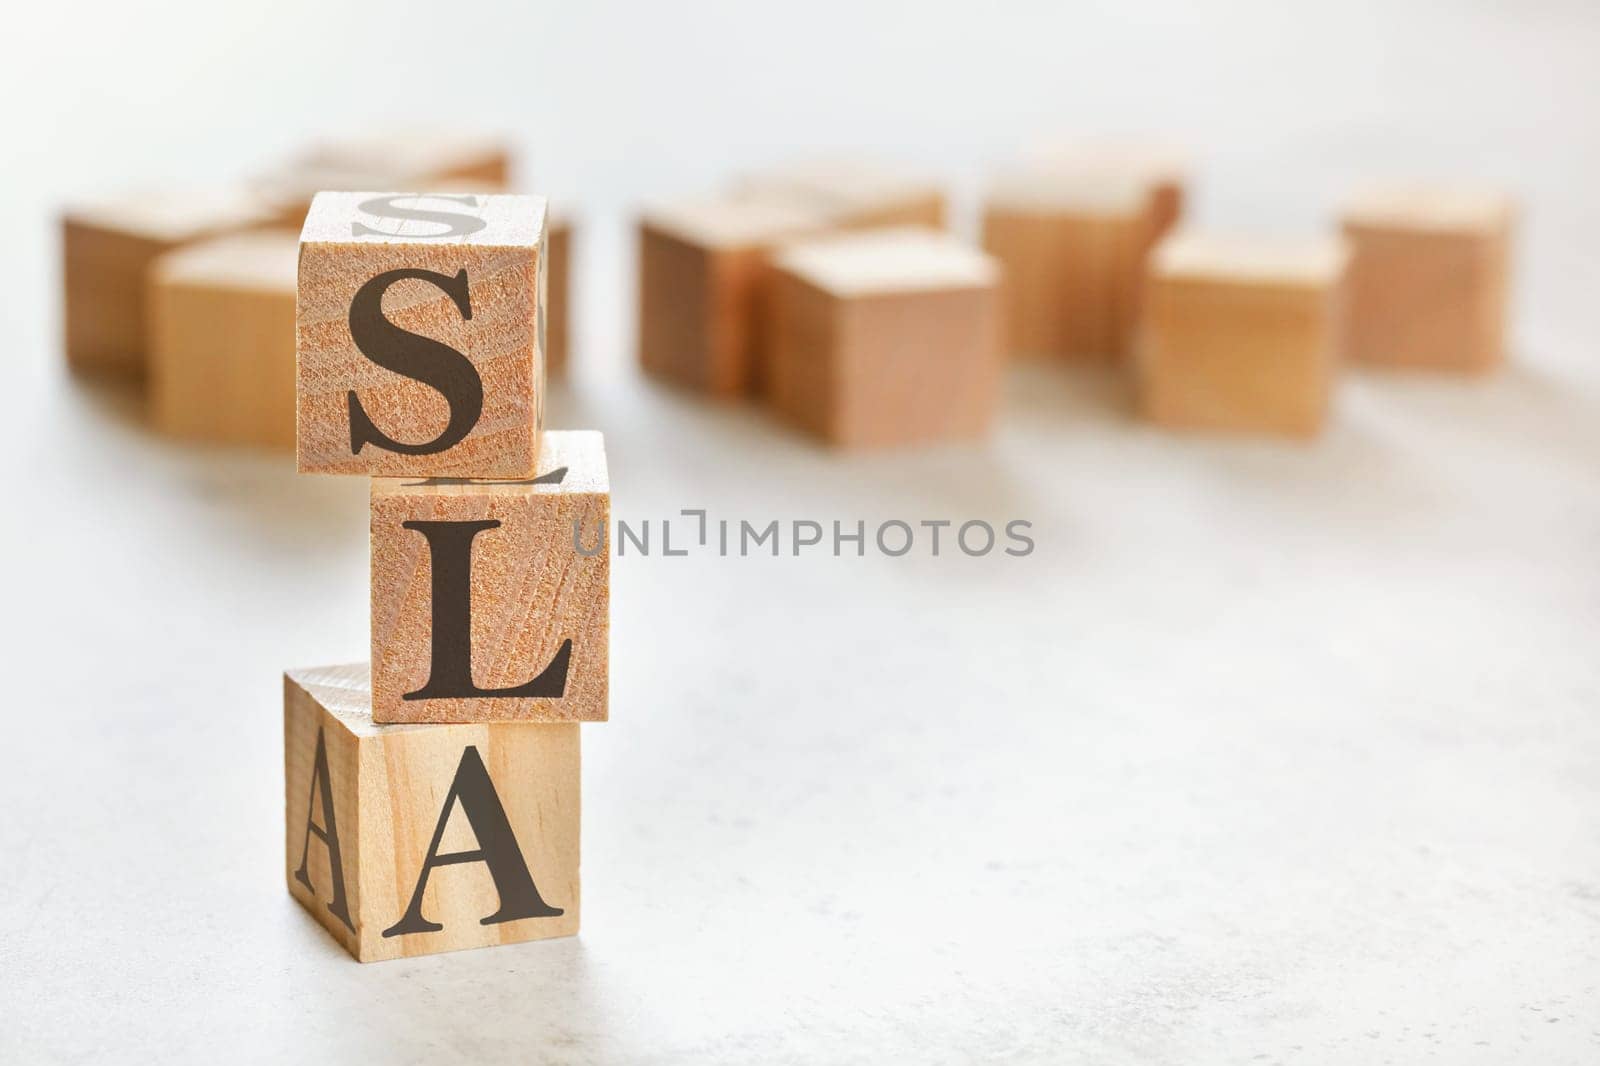 Three wooden cubes with letters SLA (means Service Level Agreement), on white table, more in background, space for text in right down corner